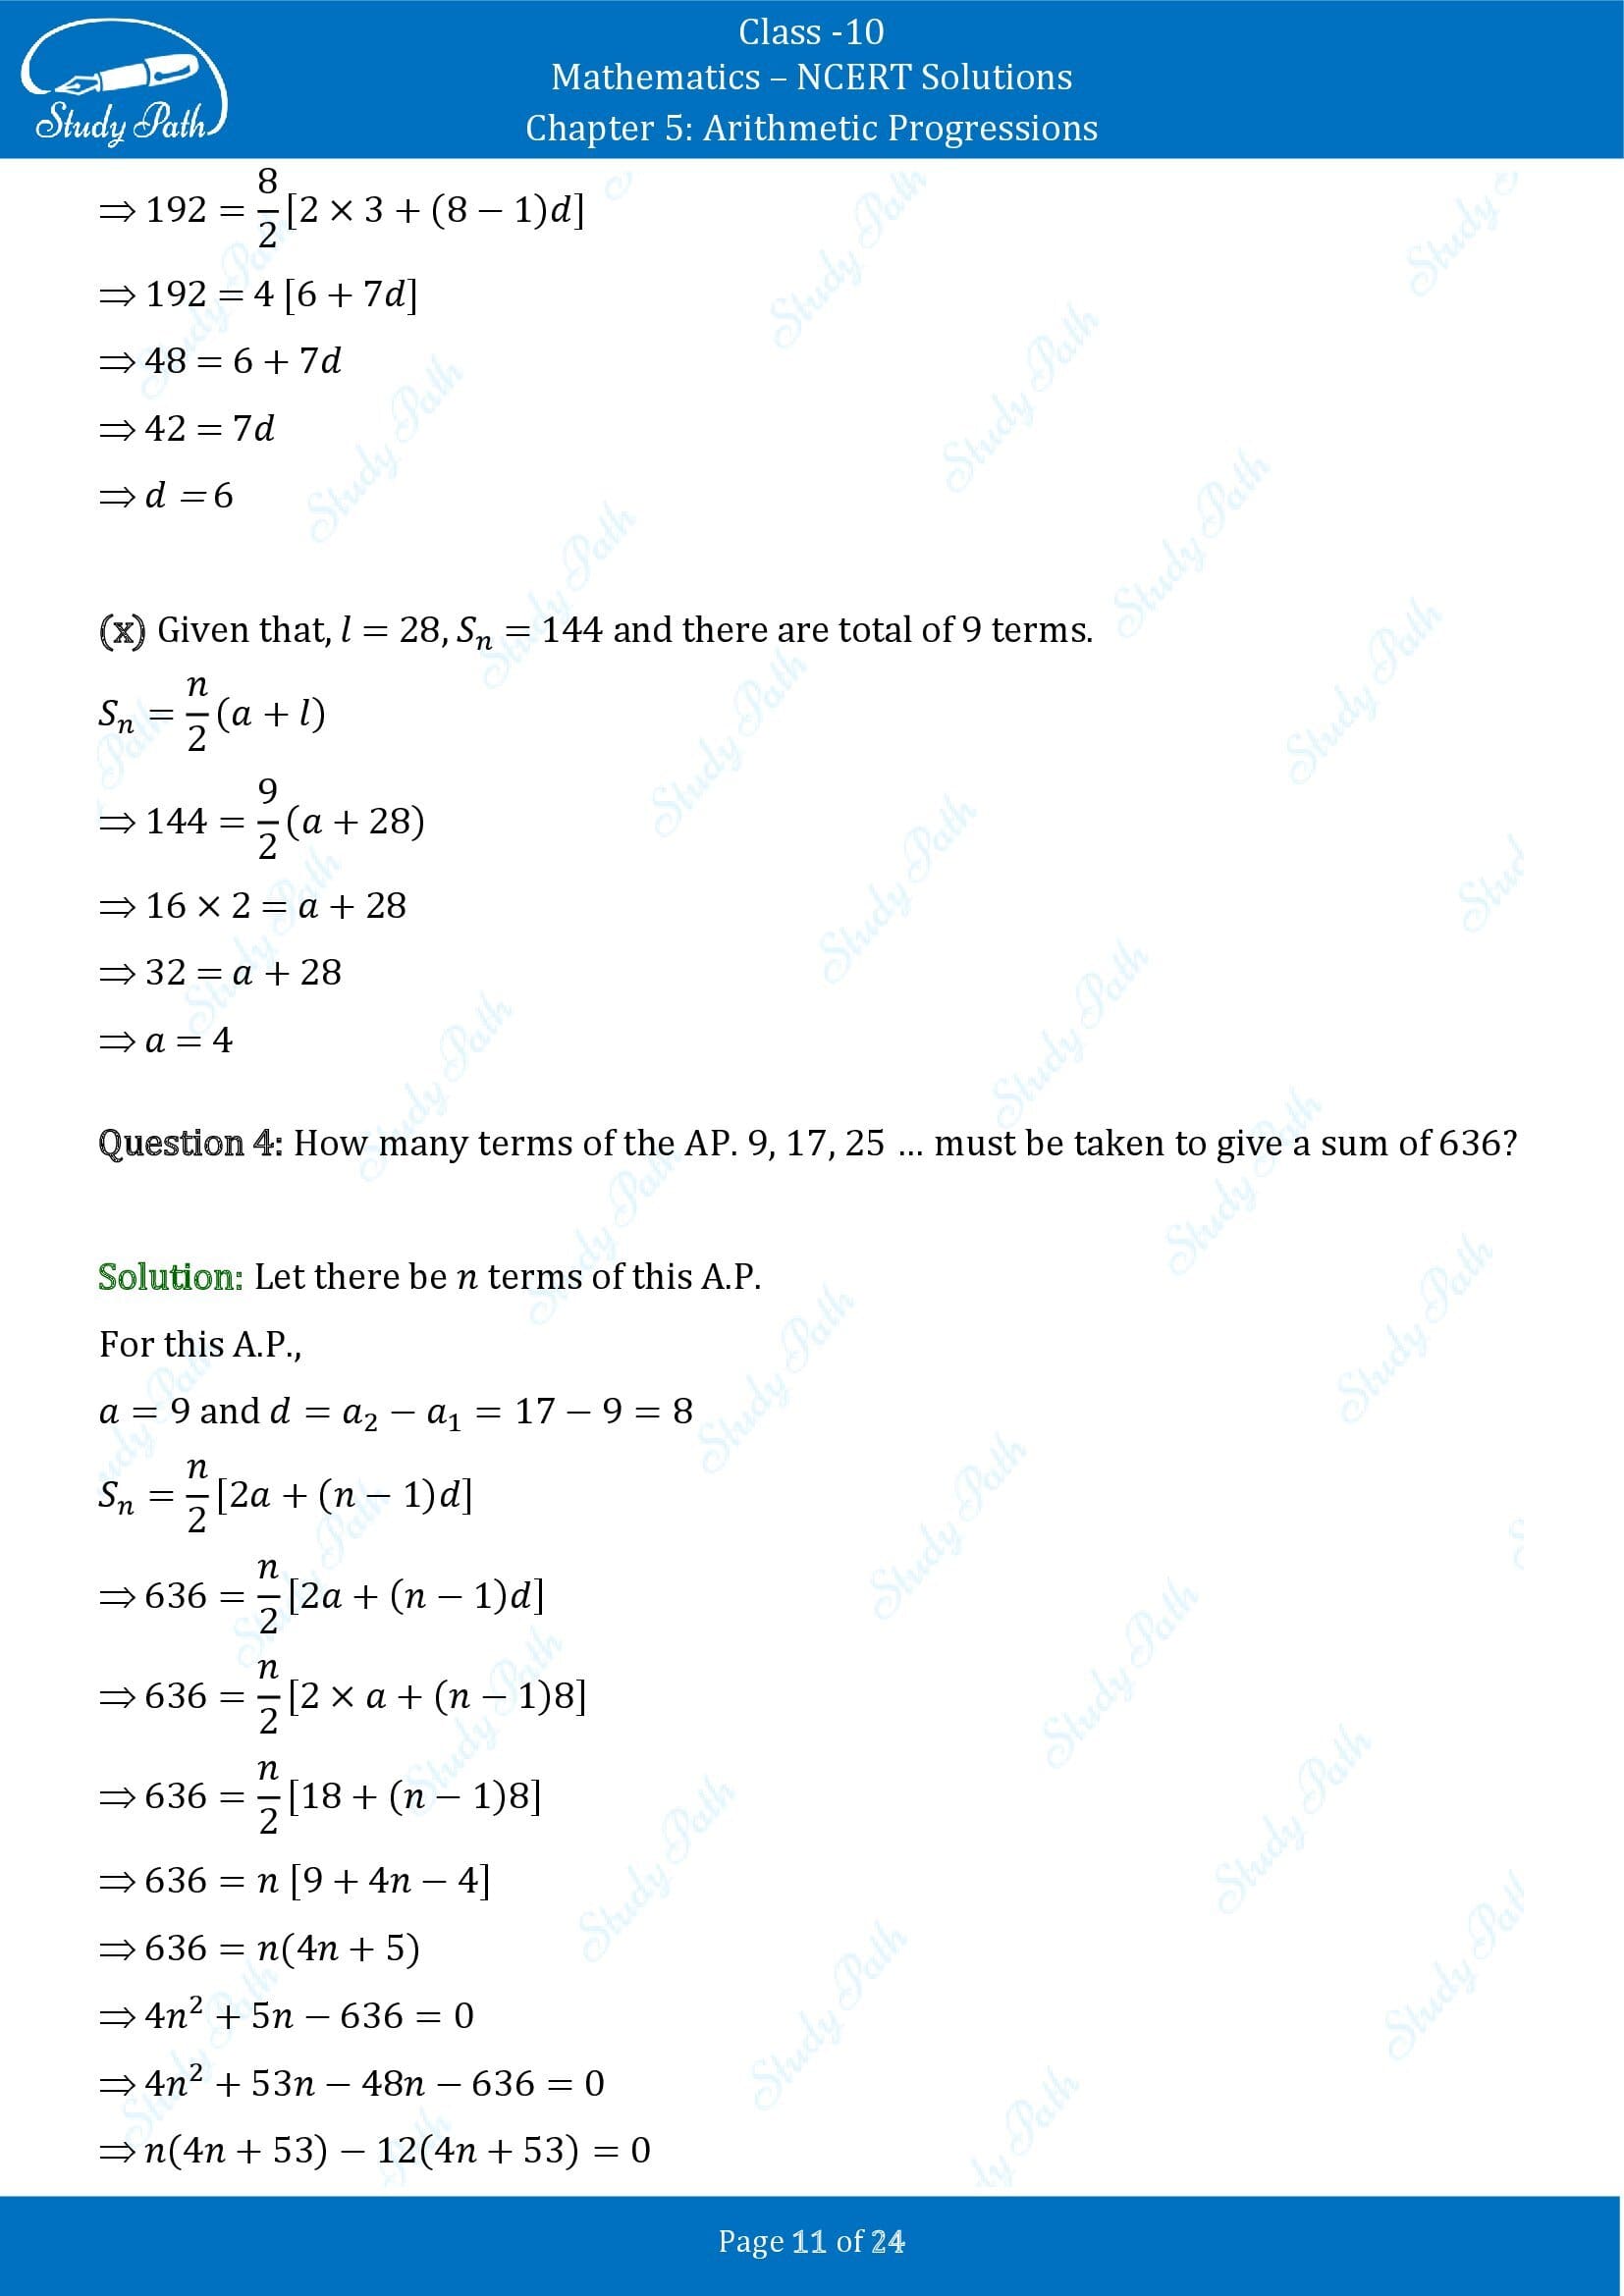 NCERT Solutions for Class 10 Maths Chapter 5 Arithmetic Progressions Exercise 5.3 00011